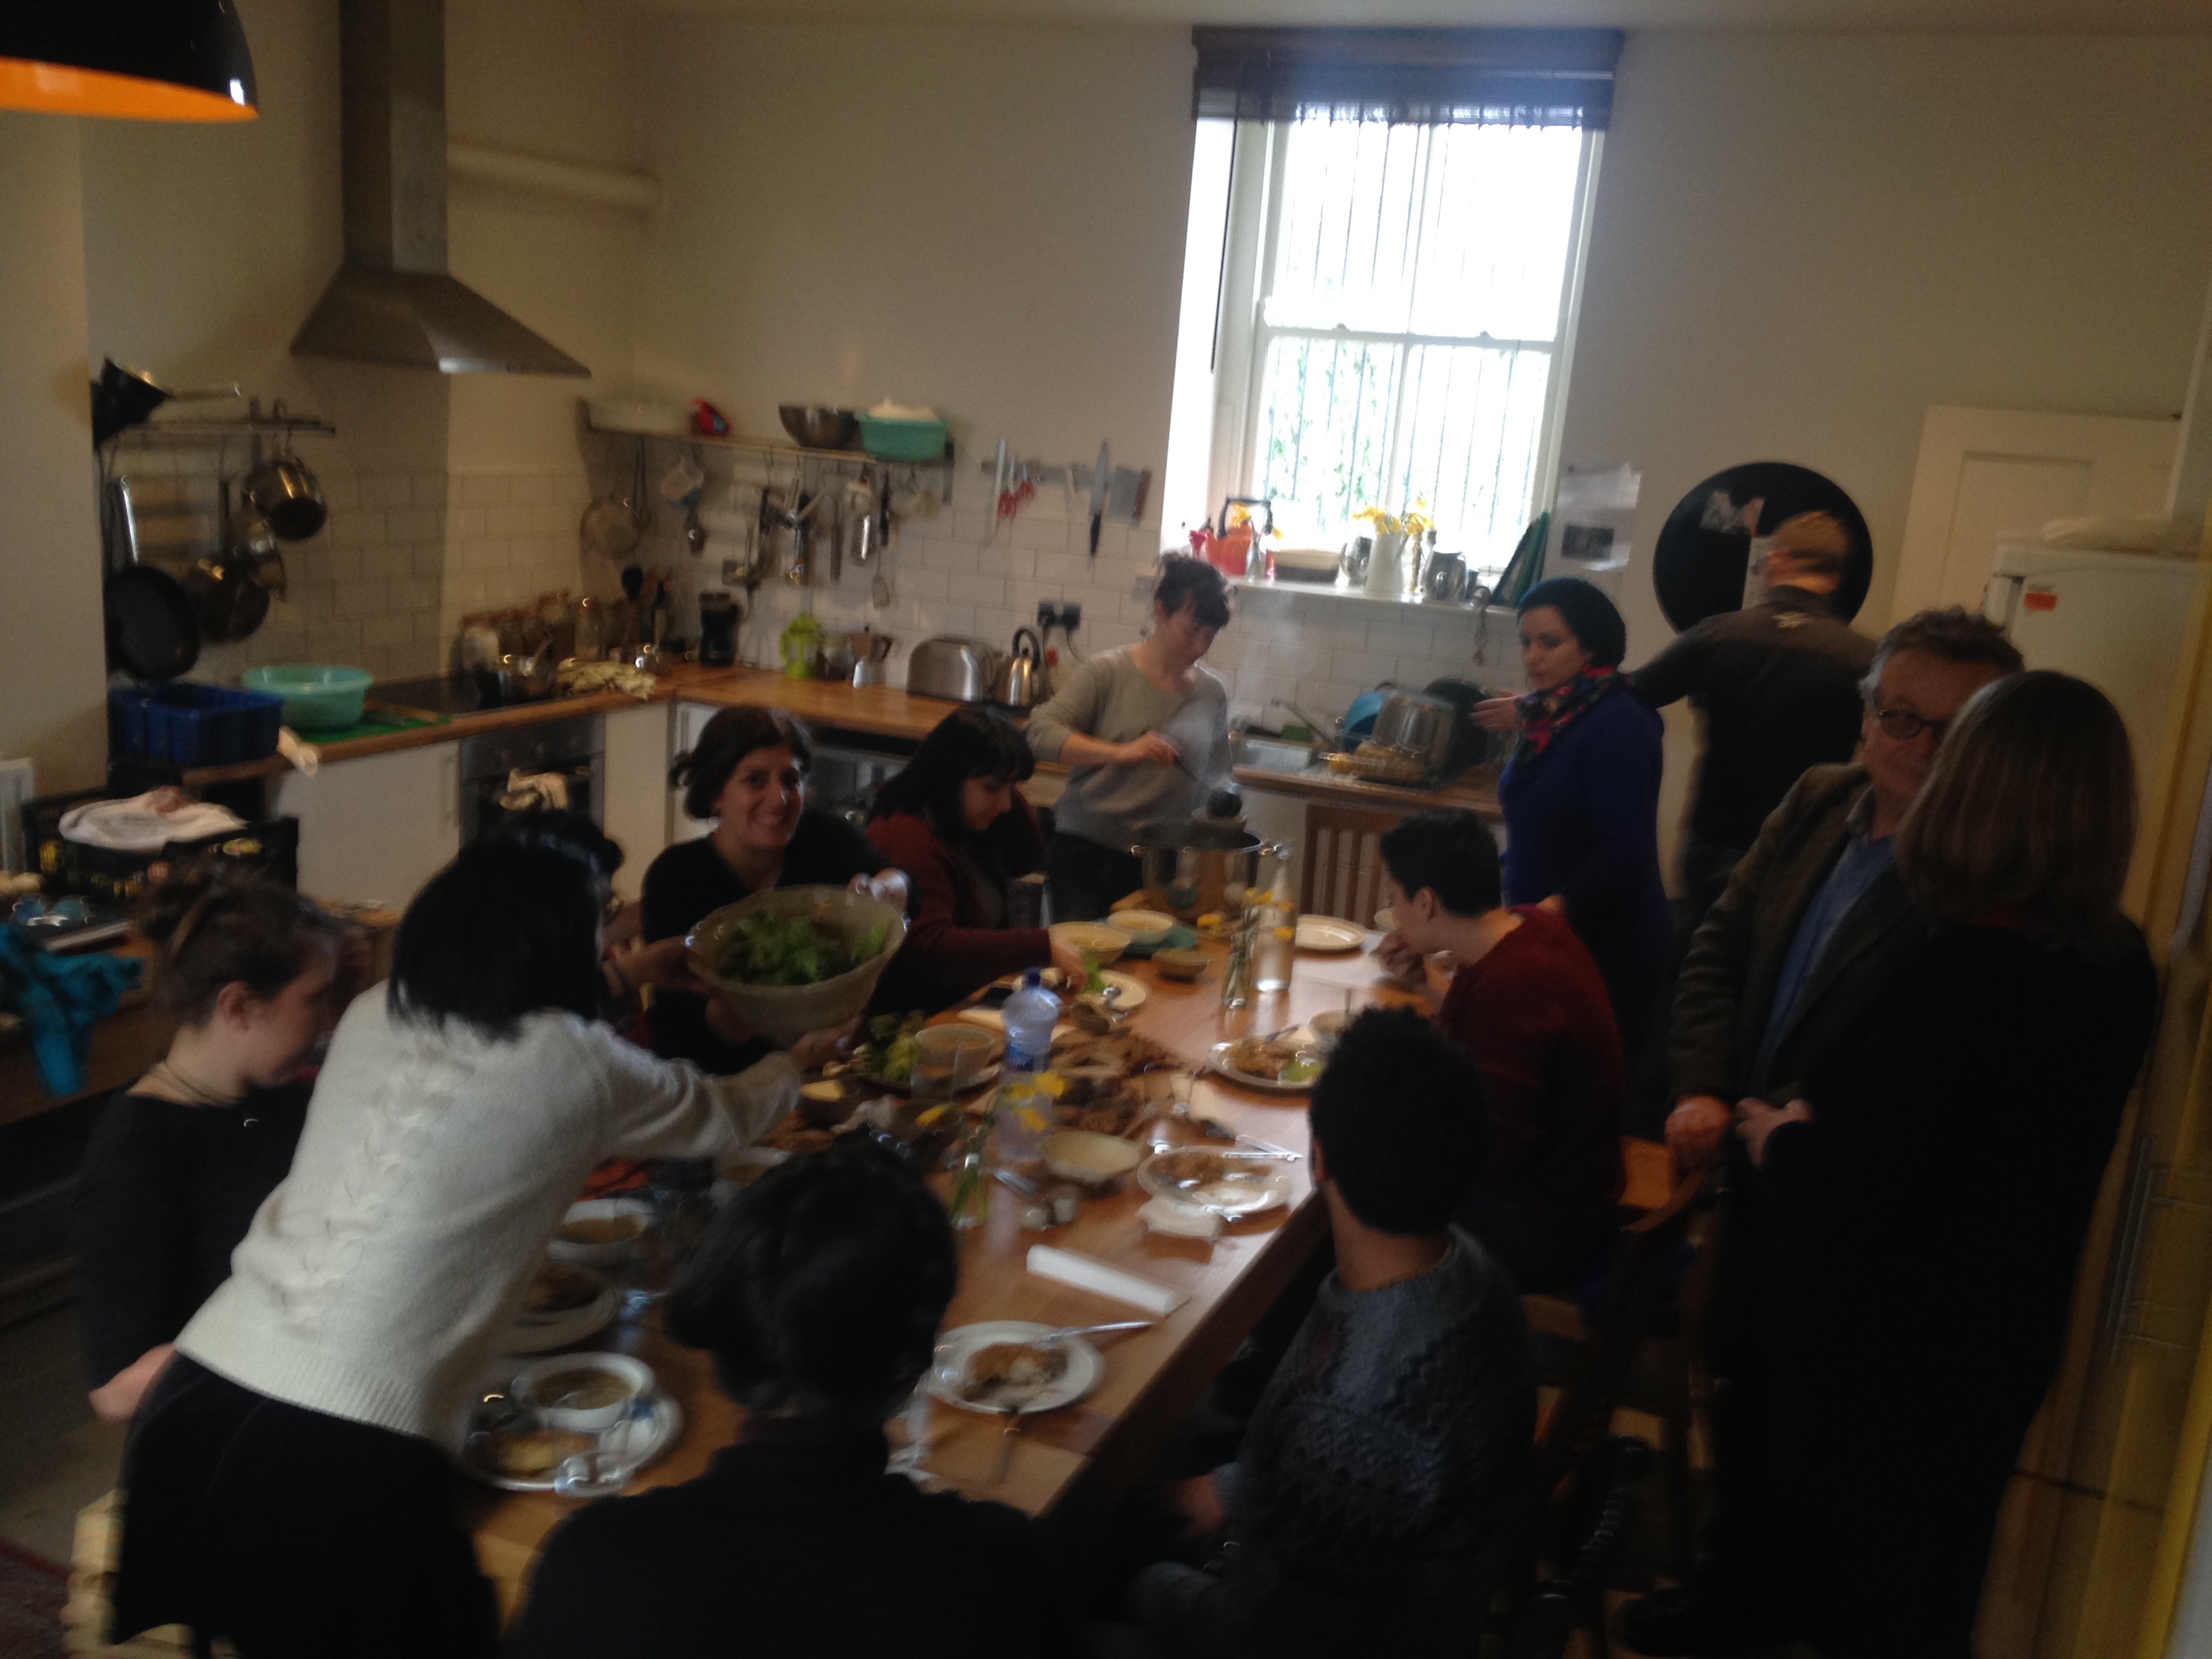 Workshop students and participants eating lunch together in IMMA's artist studios